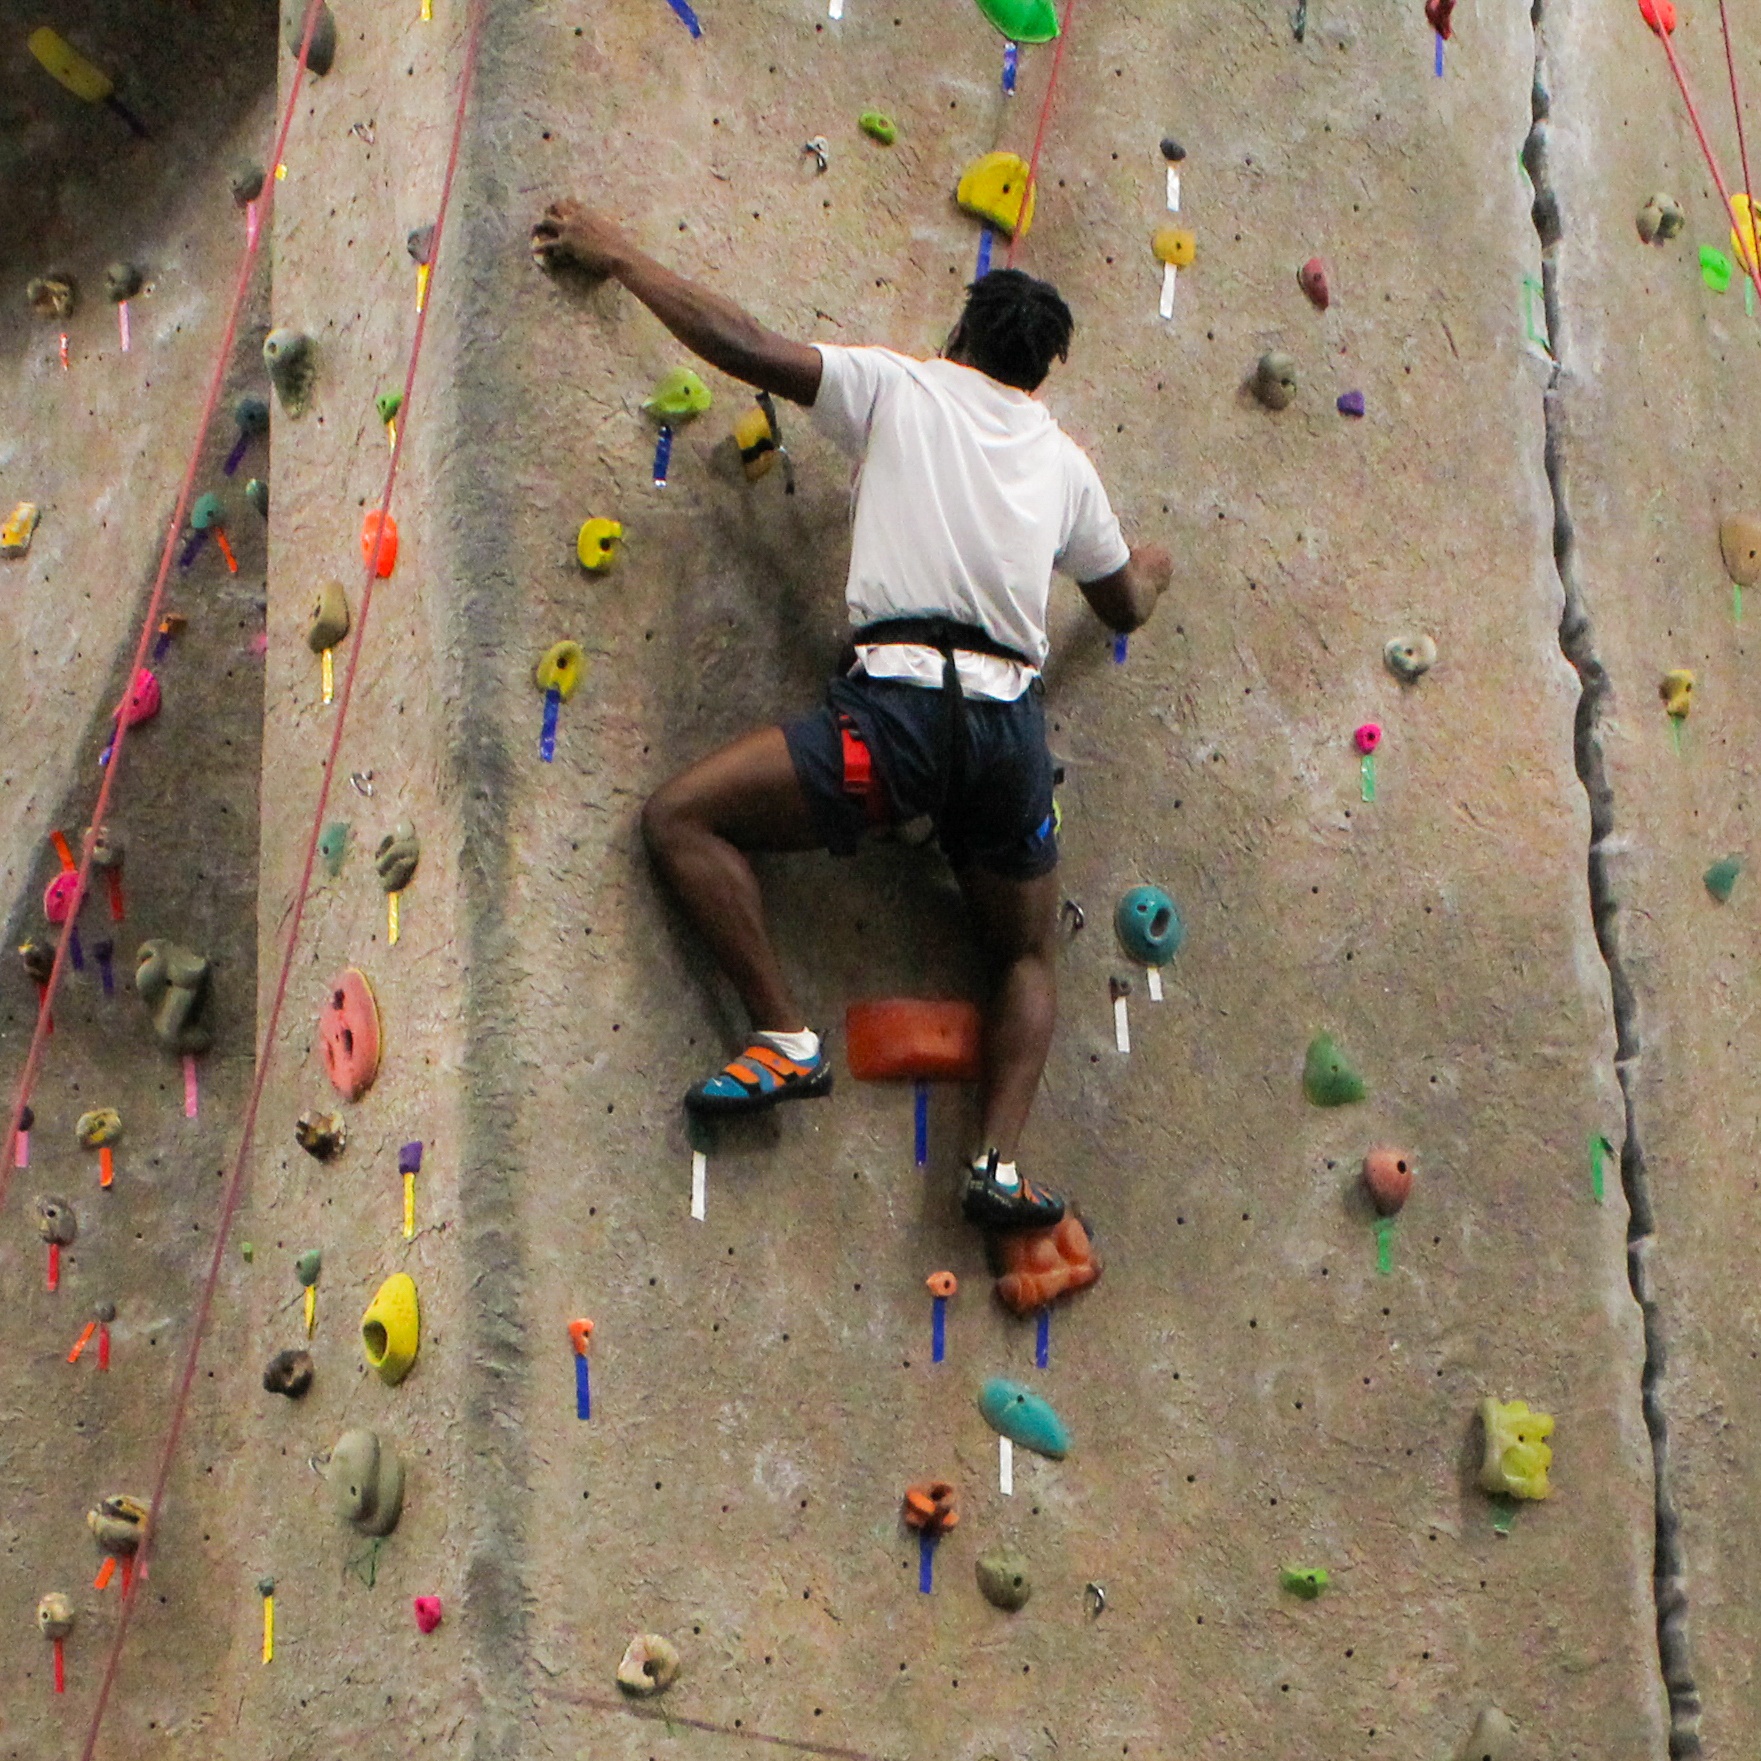 Adult using the climbing wall with left hand raised up on a hold, wearing a white shirt, climbing harness, and black shorts. 